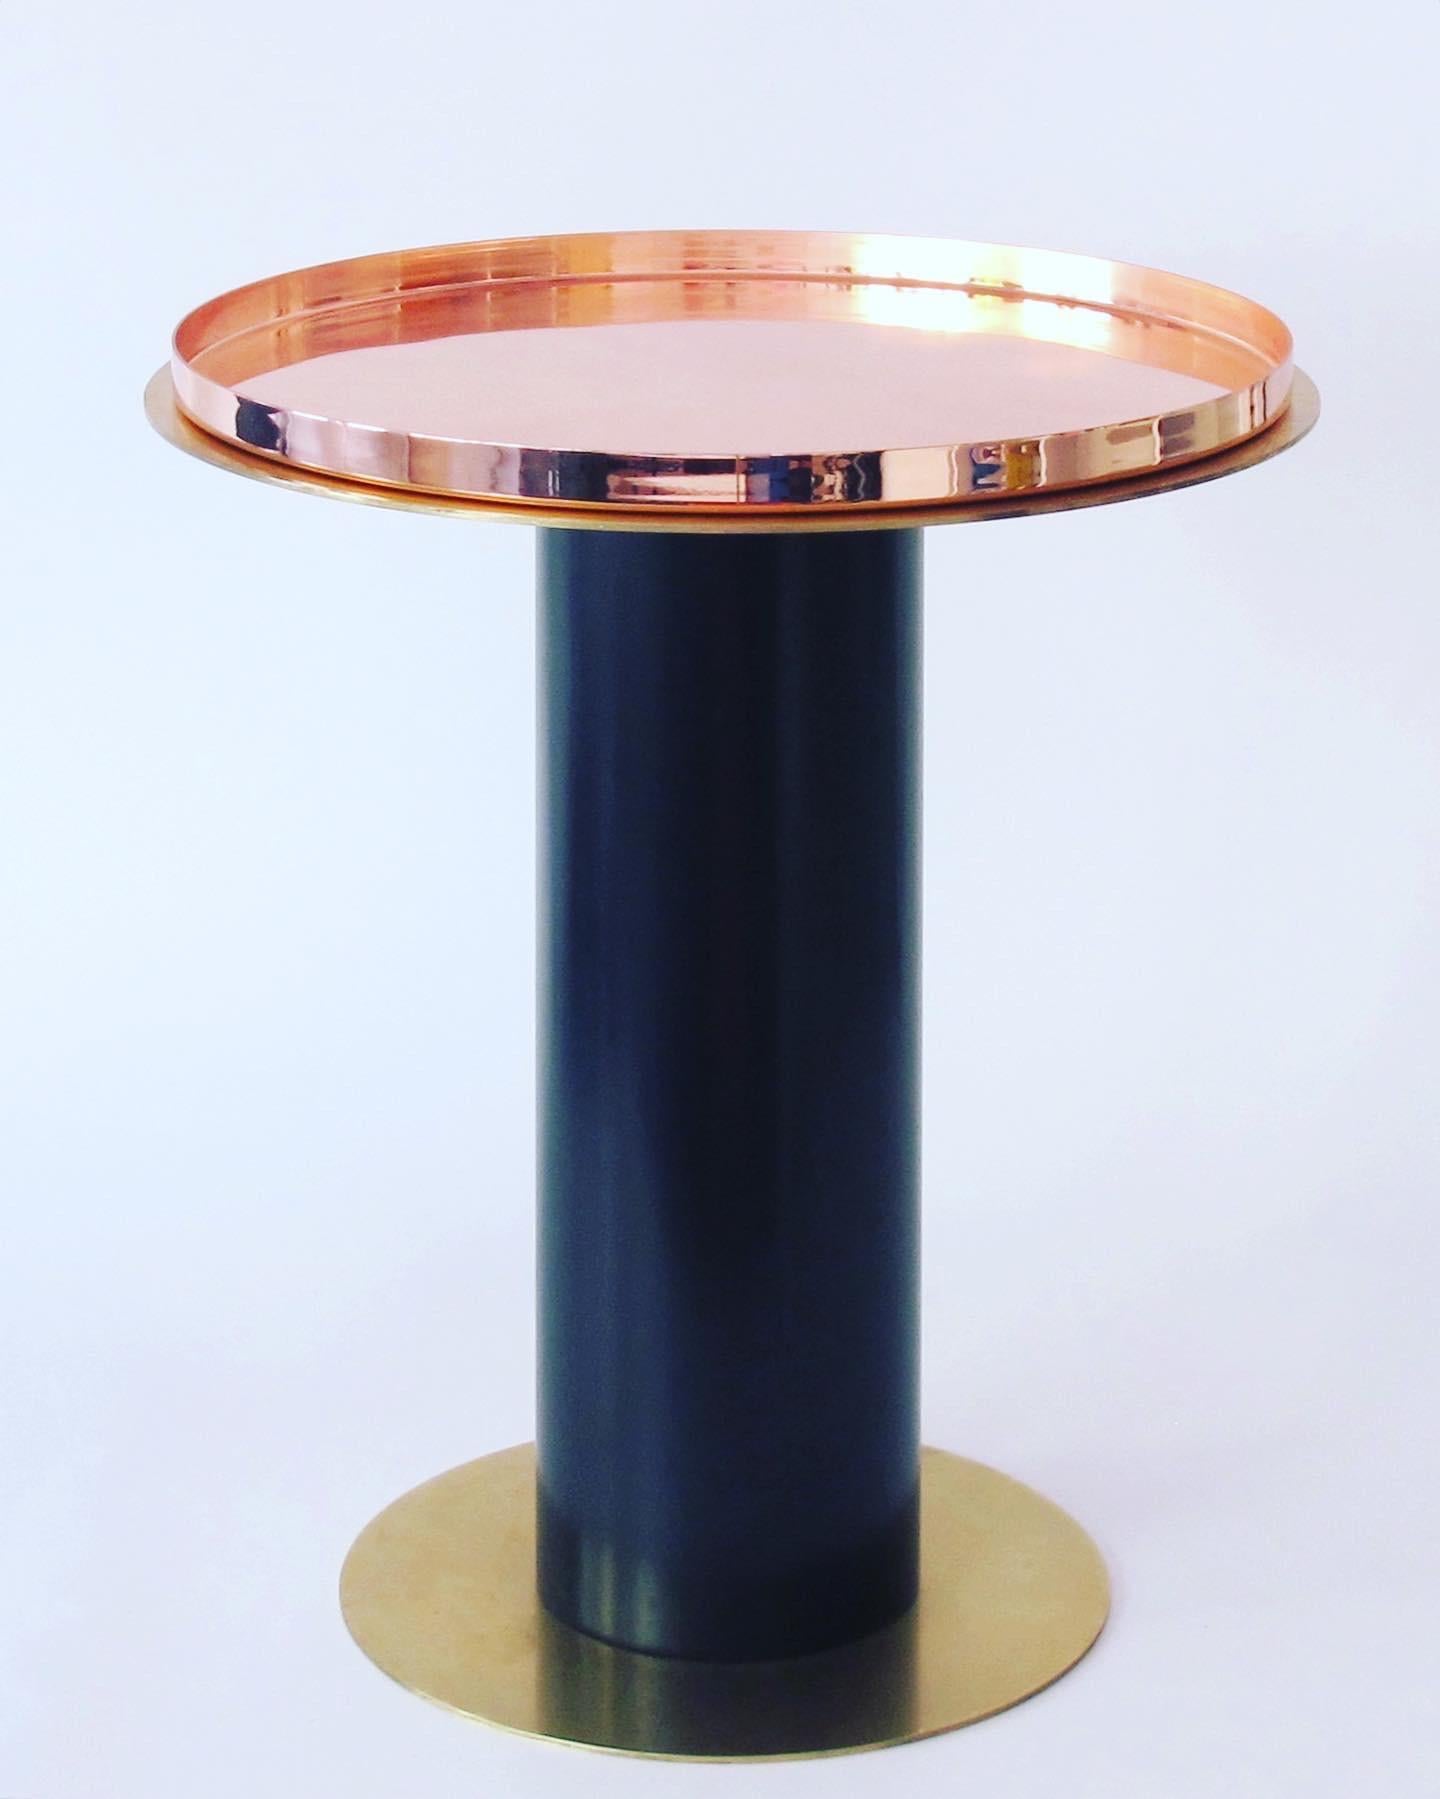 The 'Real' table is based on the silhouette of a cable reel.

Simply stylish yet versatile and very practical. This side table is the perfect addition to any living space or commercial lounge.

Made out of steel, brass and copper. The base and